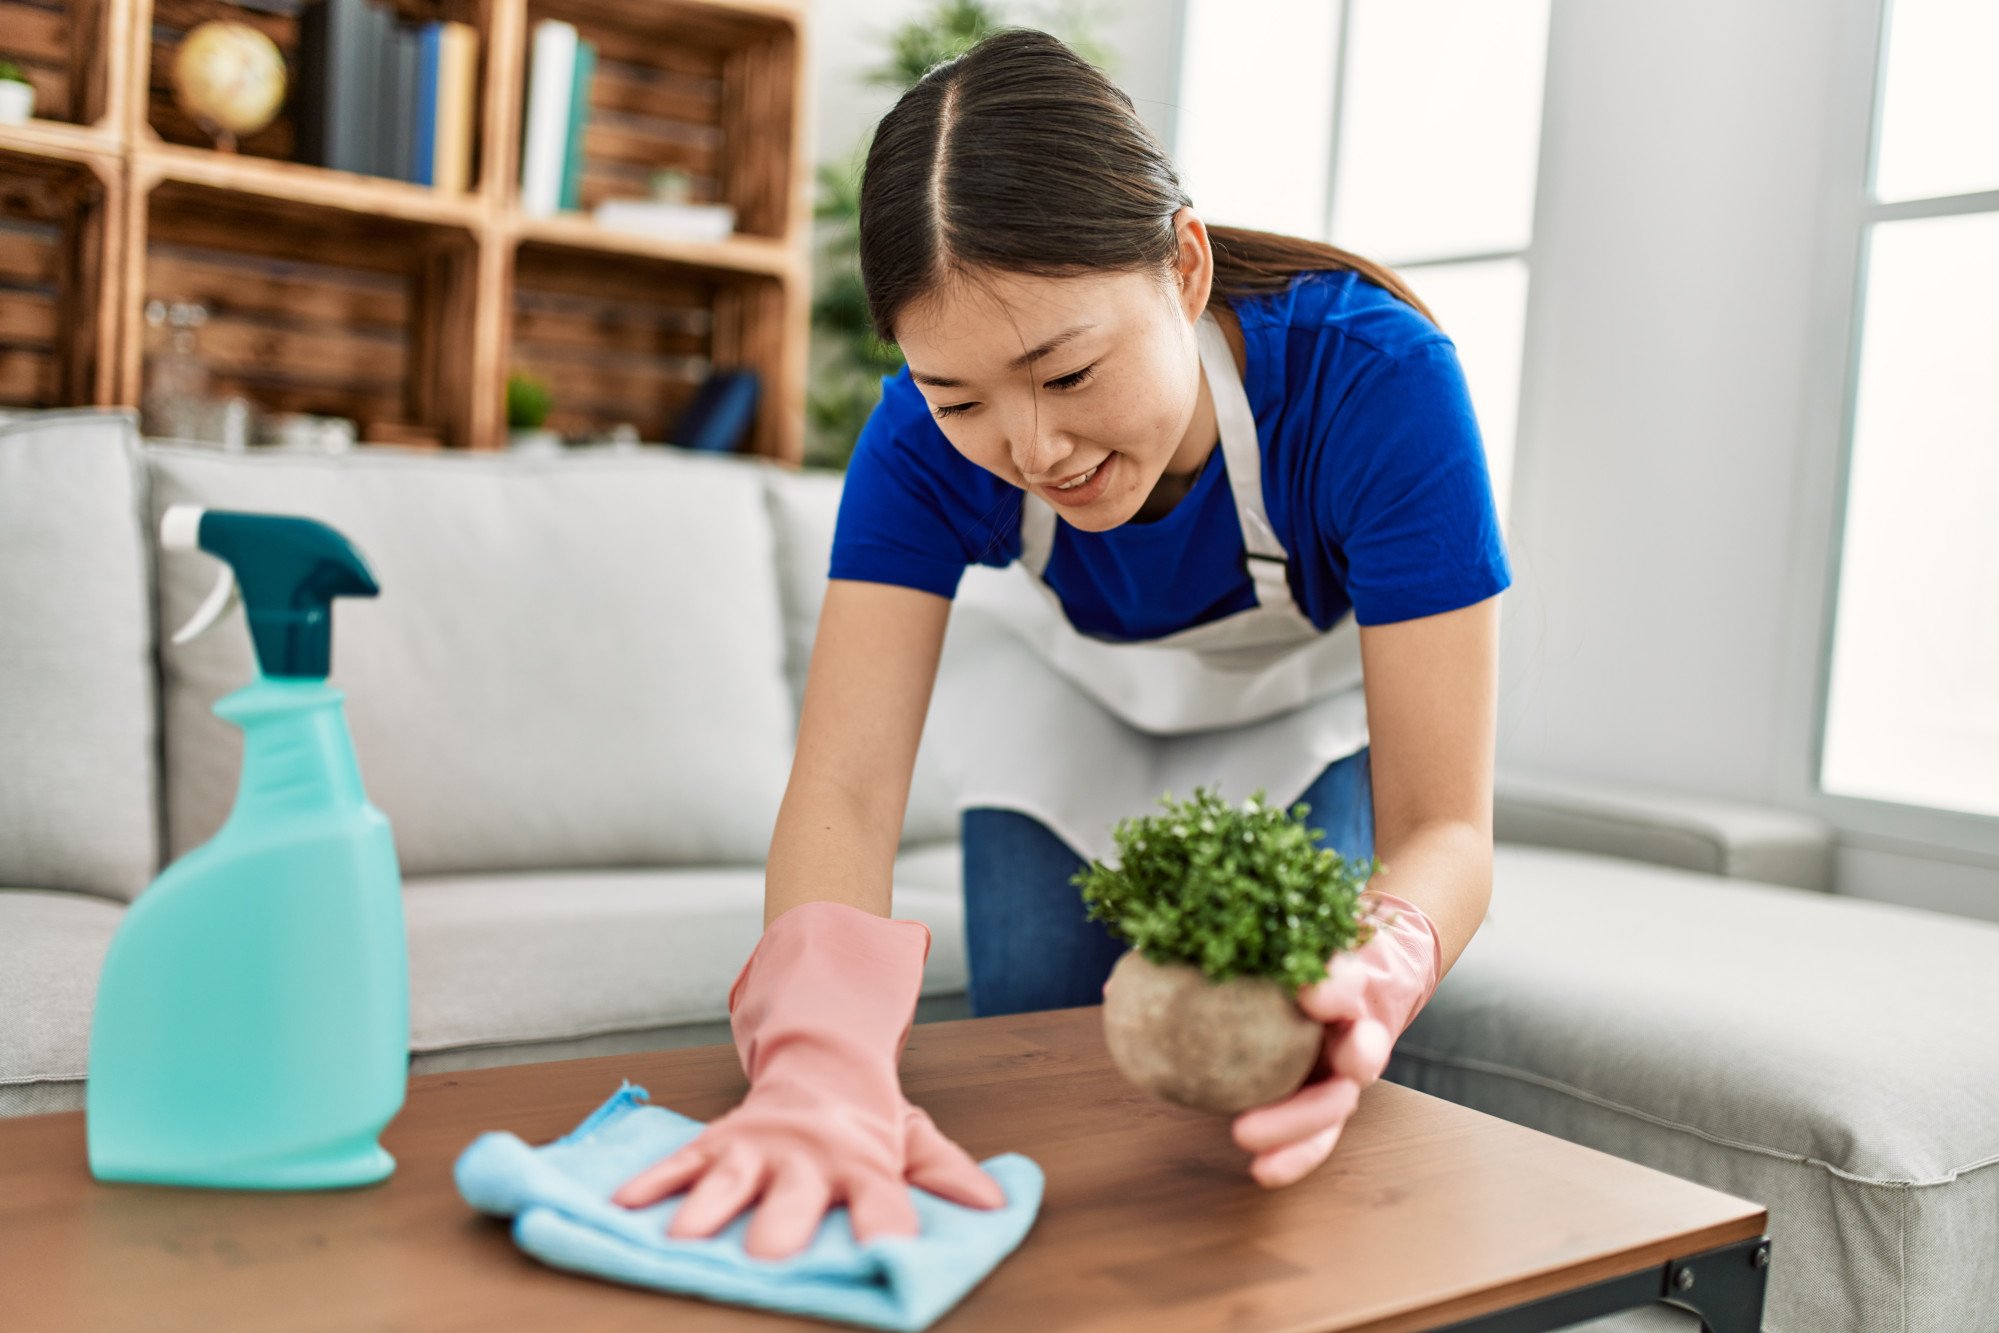 Chinese women on average spend 2.1 hours a day on housework, roughly three times that of men, according to a 2019 survey. Photo: Shutterstock